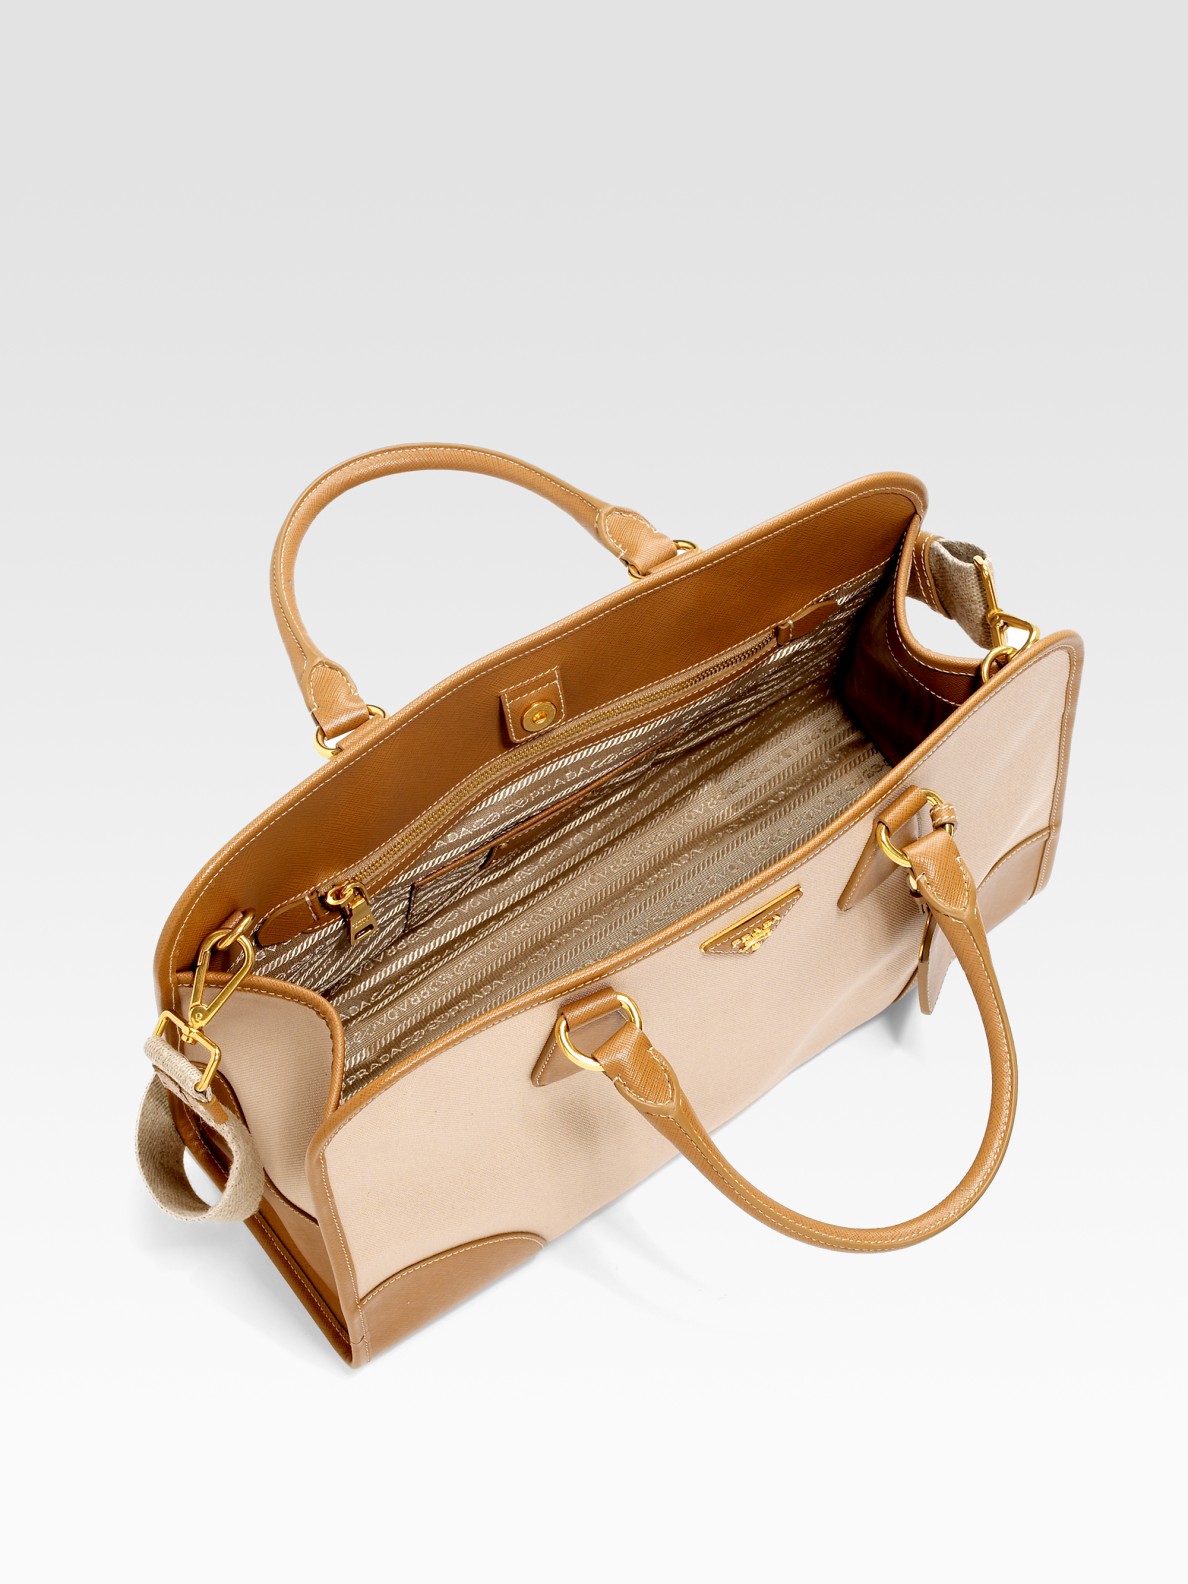 Lyst - Prada Saffiano Leather & Canvas Top Handle Bag in Natural